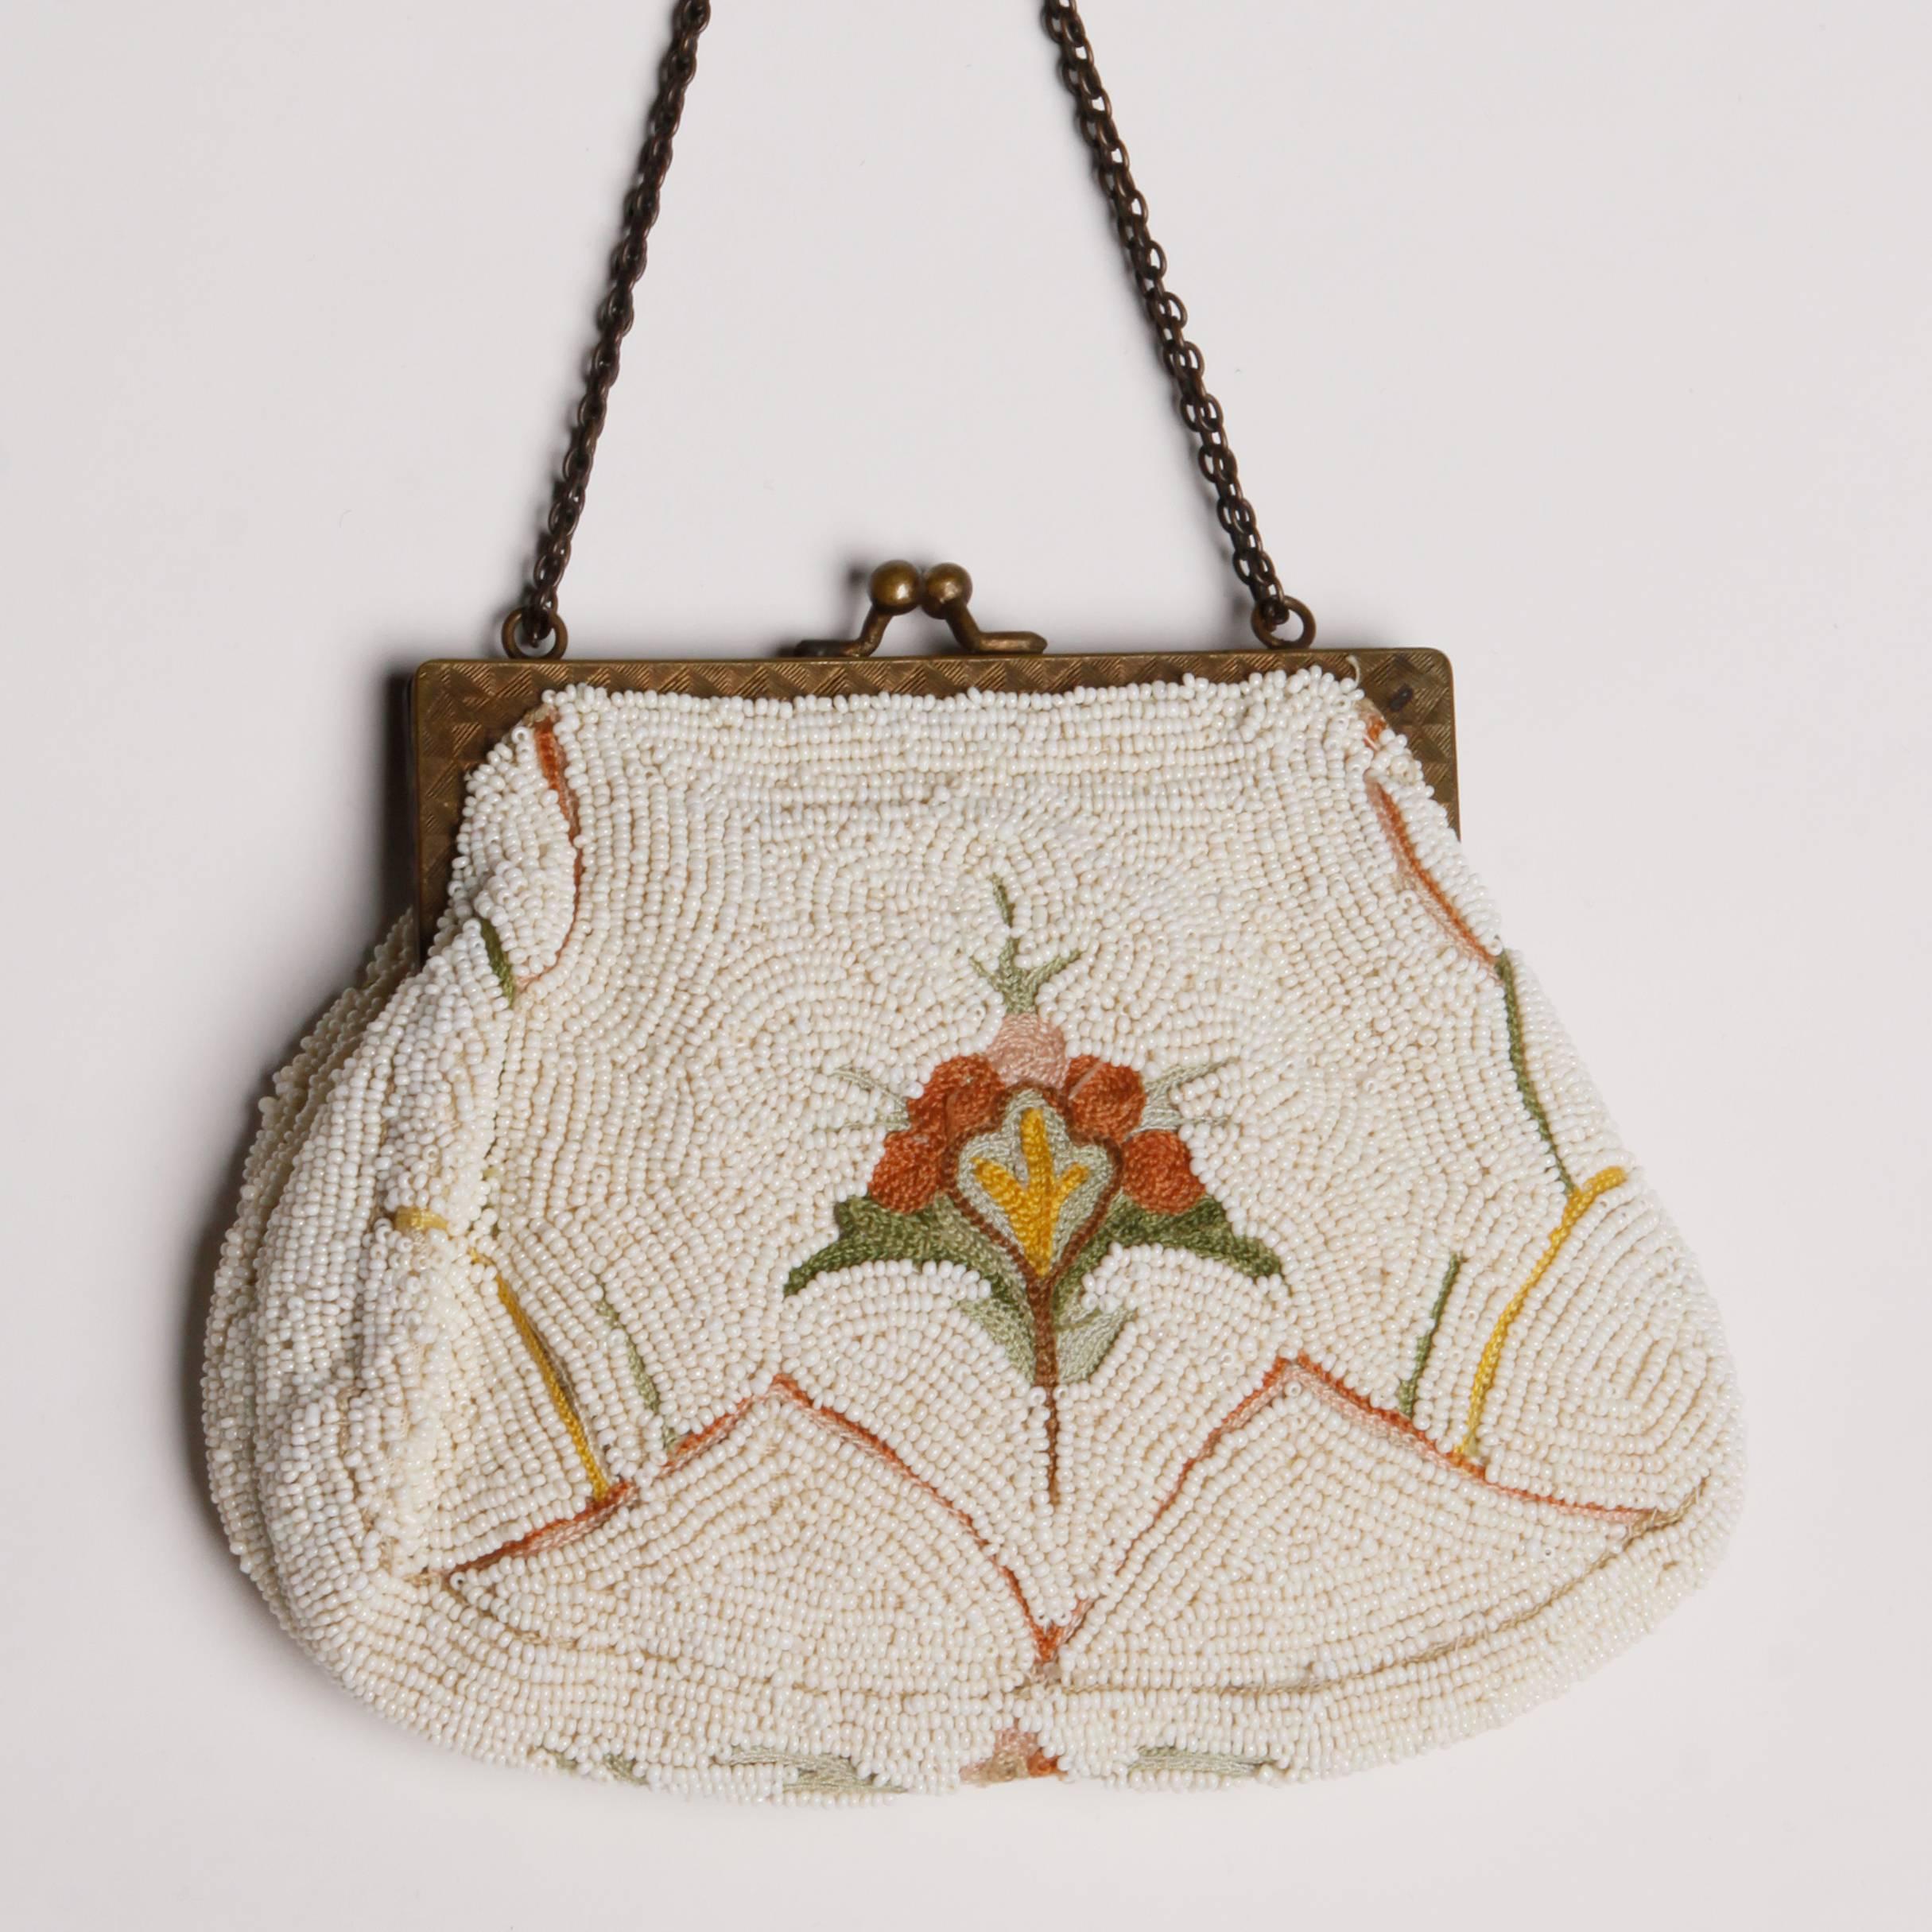 Women's French Hand Made White Beaded Bag with Floral Embroidery